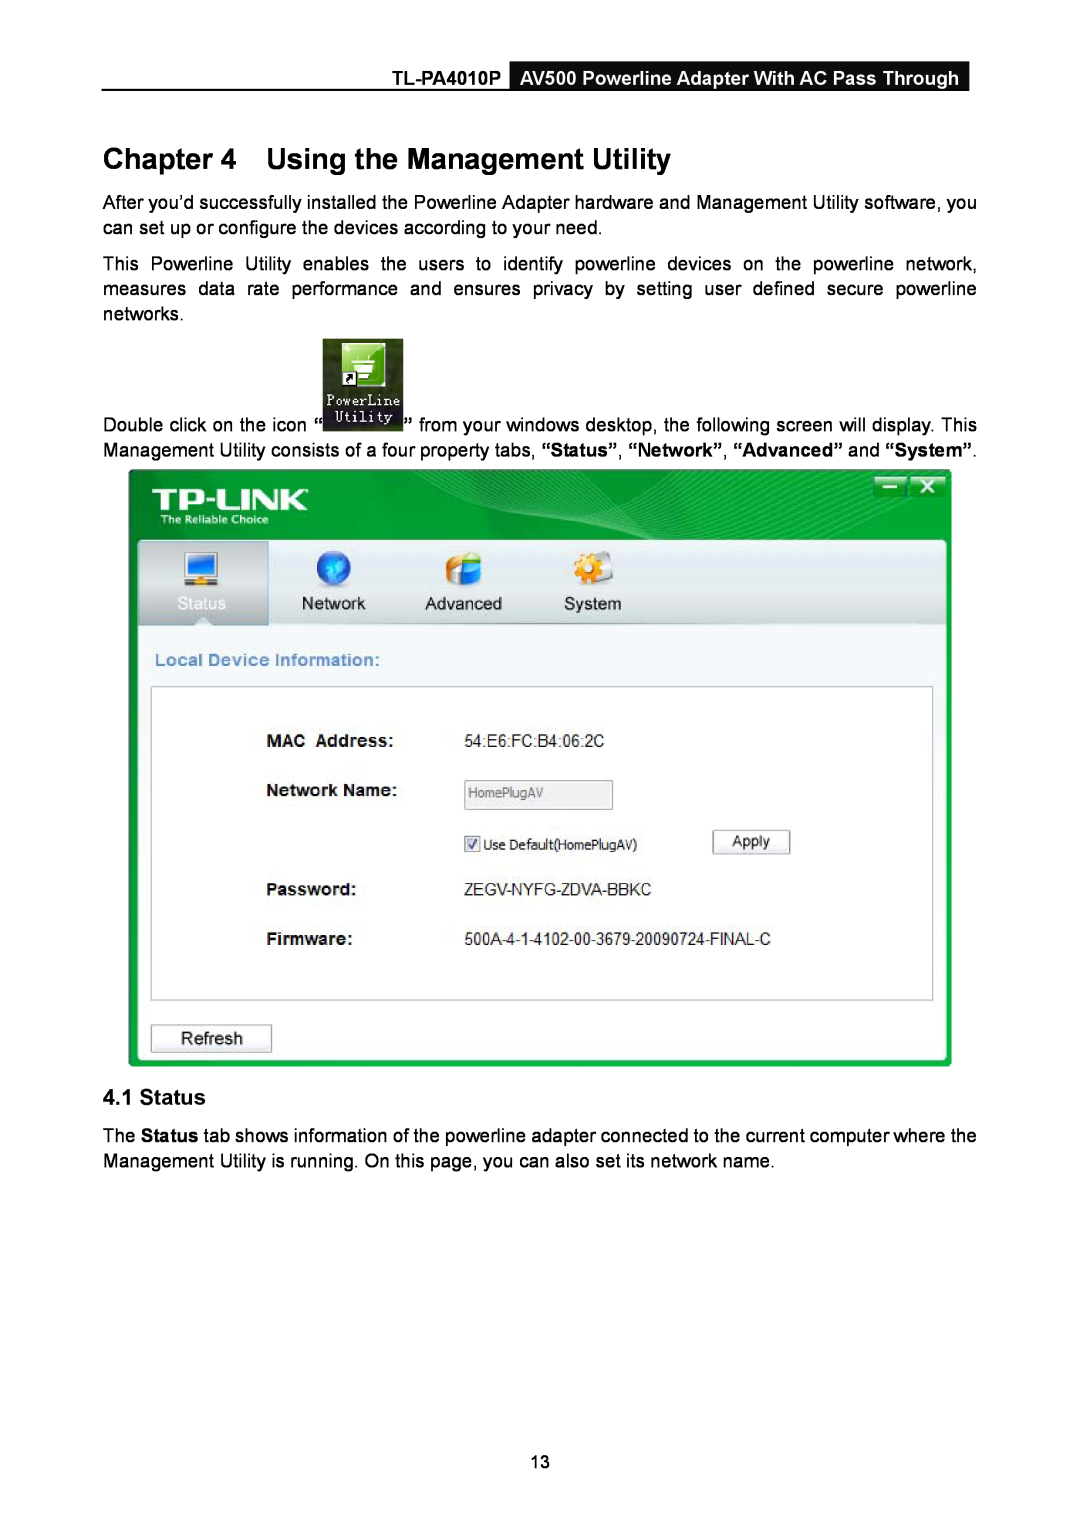 TP-Link manual Using the Management Utility, Status, TL-PA4010P AV500 Powerline Adapter With AC Pass Through 